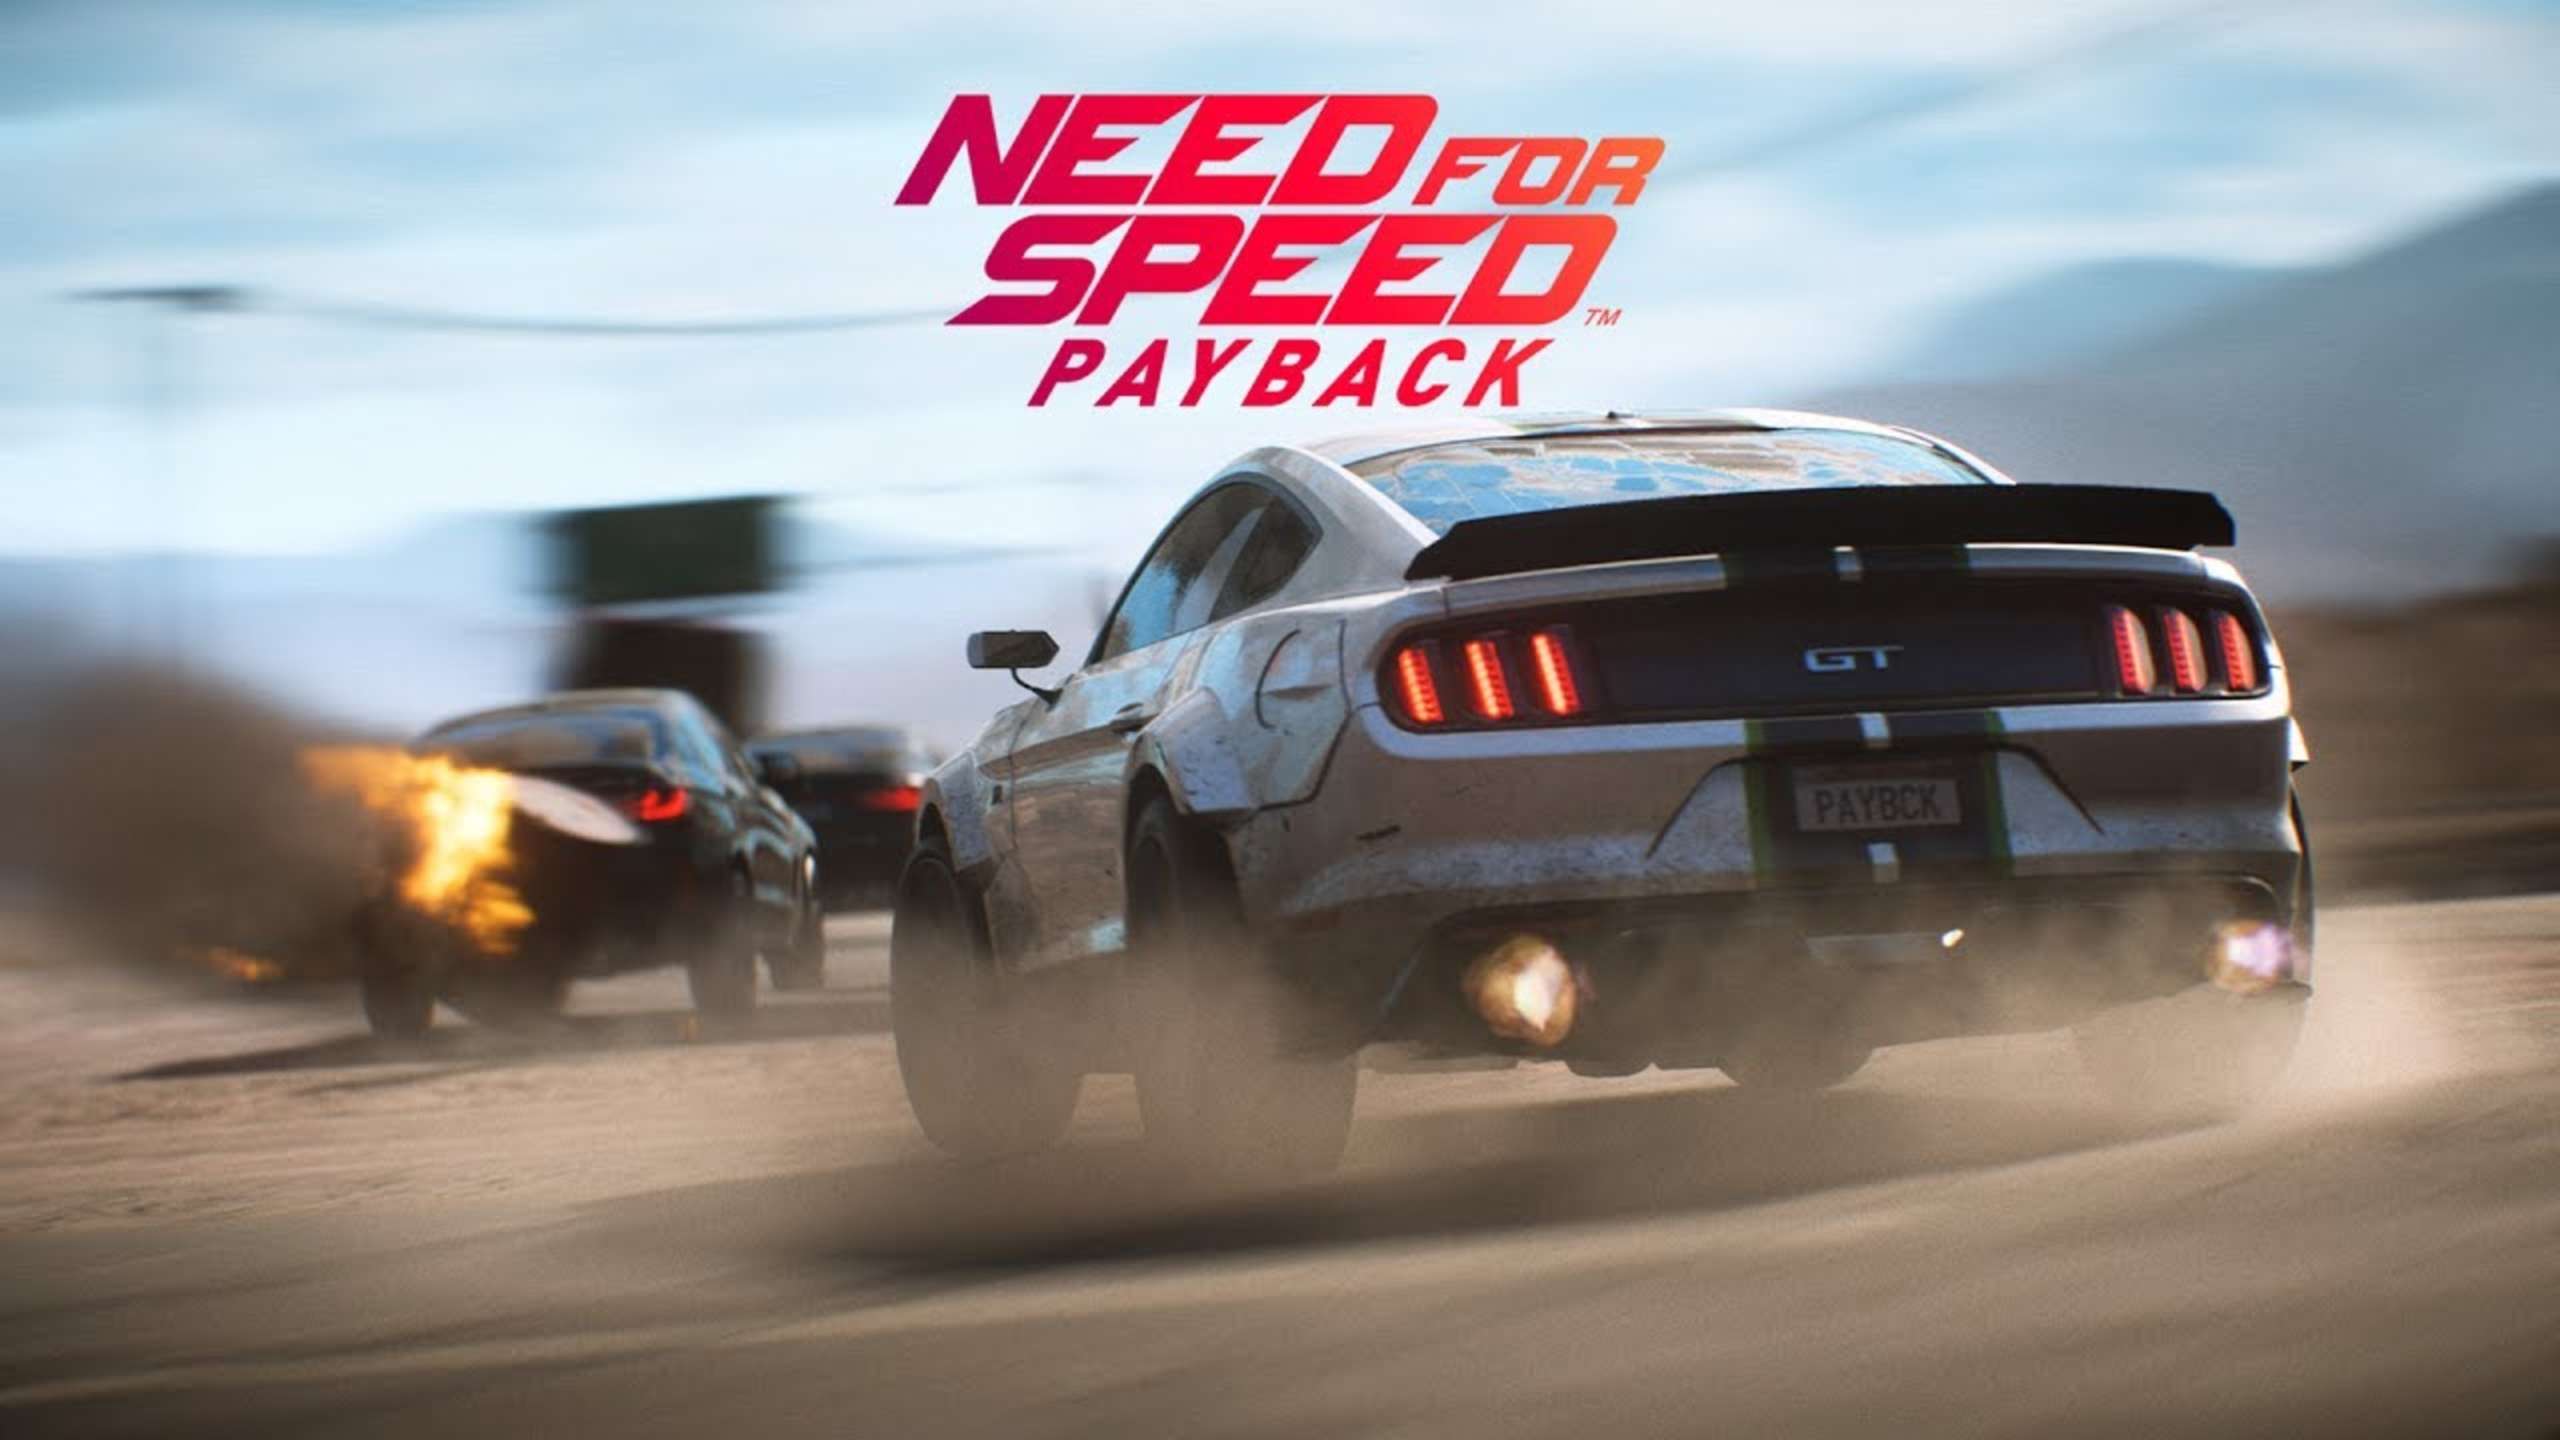 Need for speed playback. Игра need for Speed Payback. Need for Speed Payback Deluxe Edition. Need for Speed: Payback (2017). NFS Payback 2020.